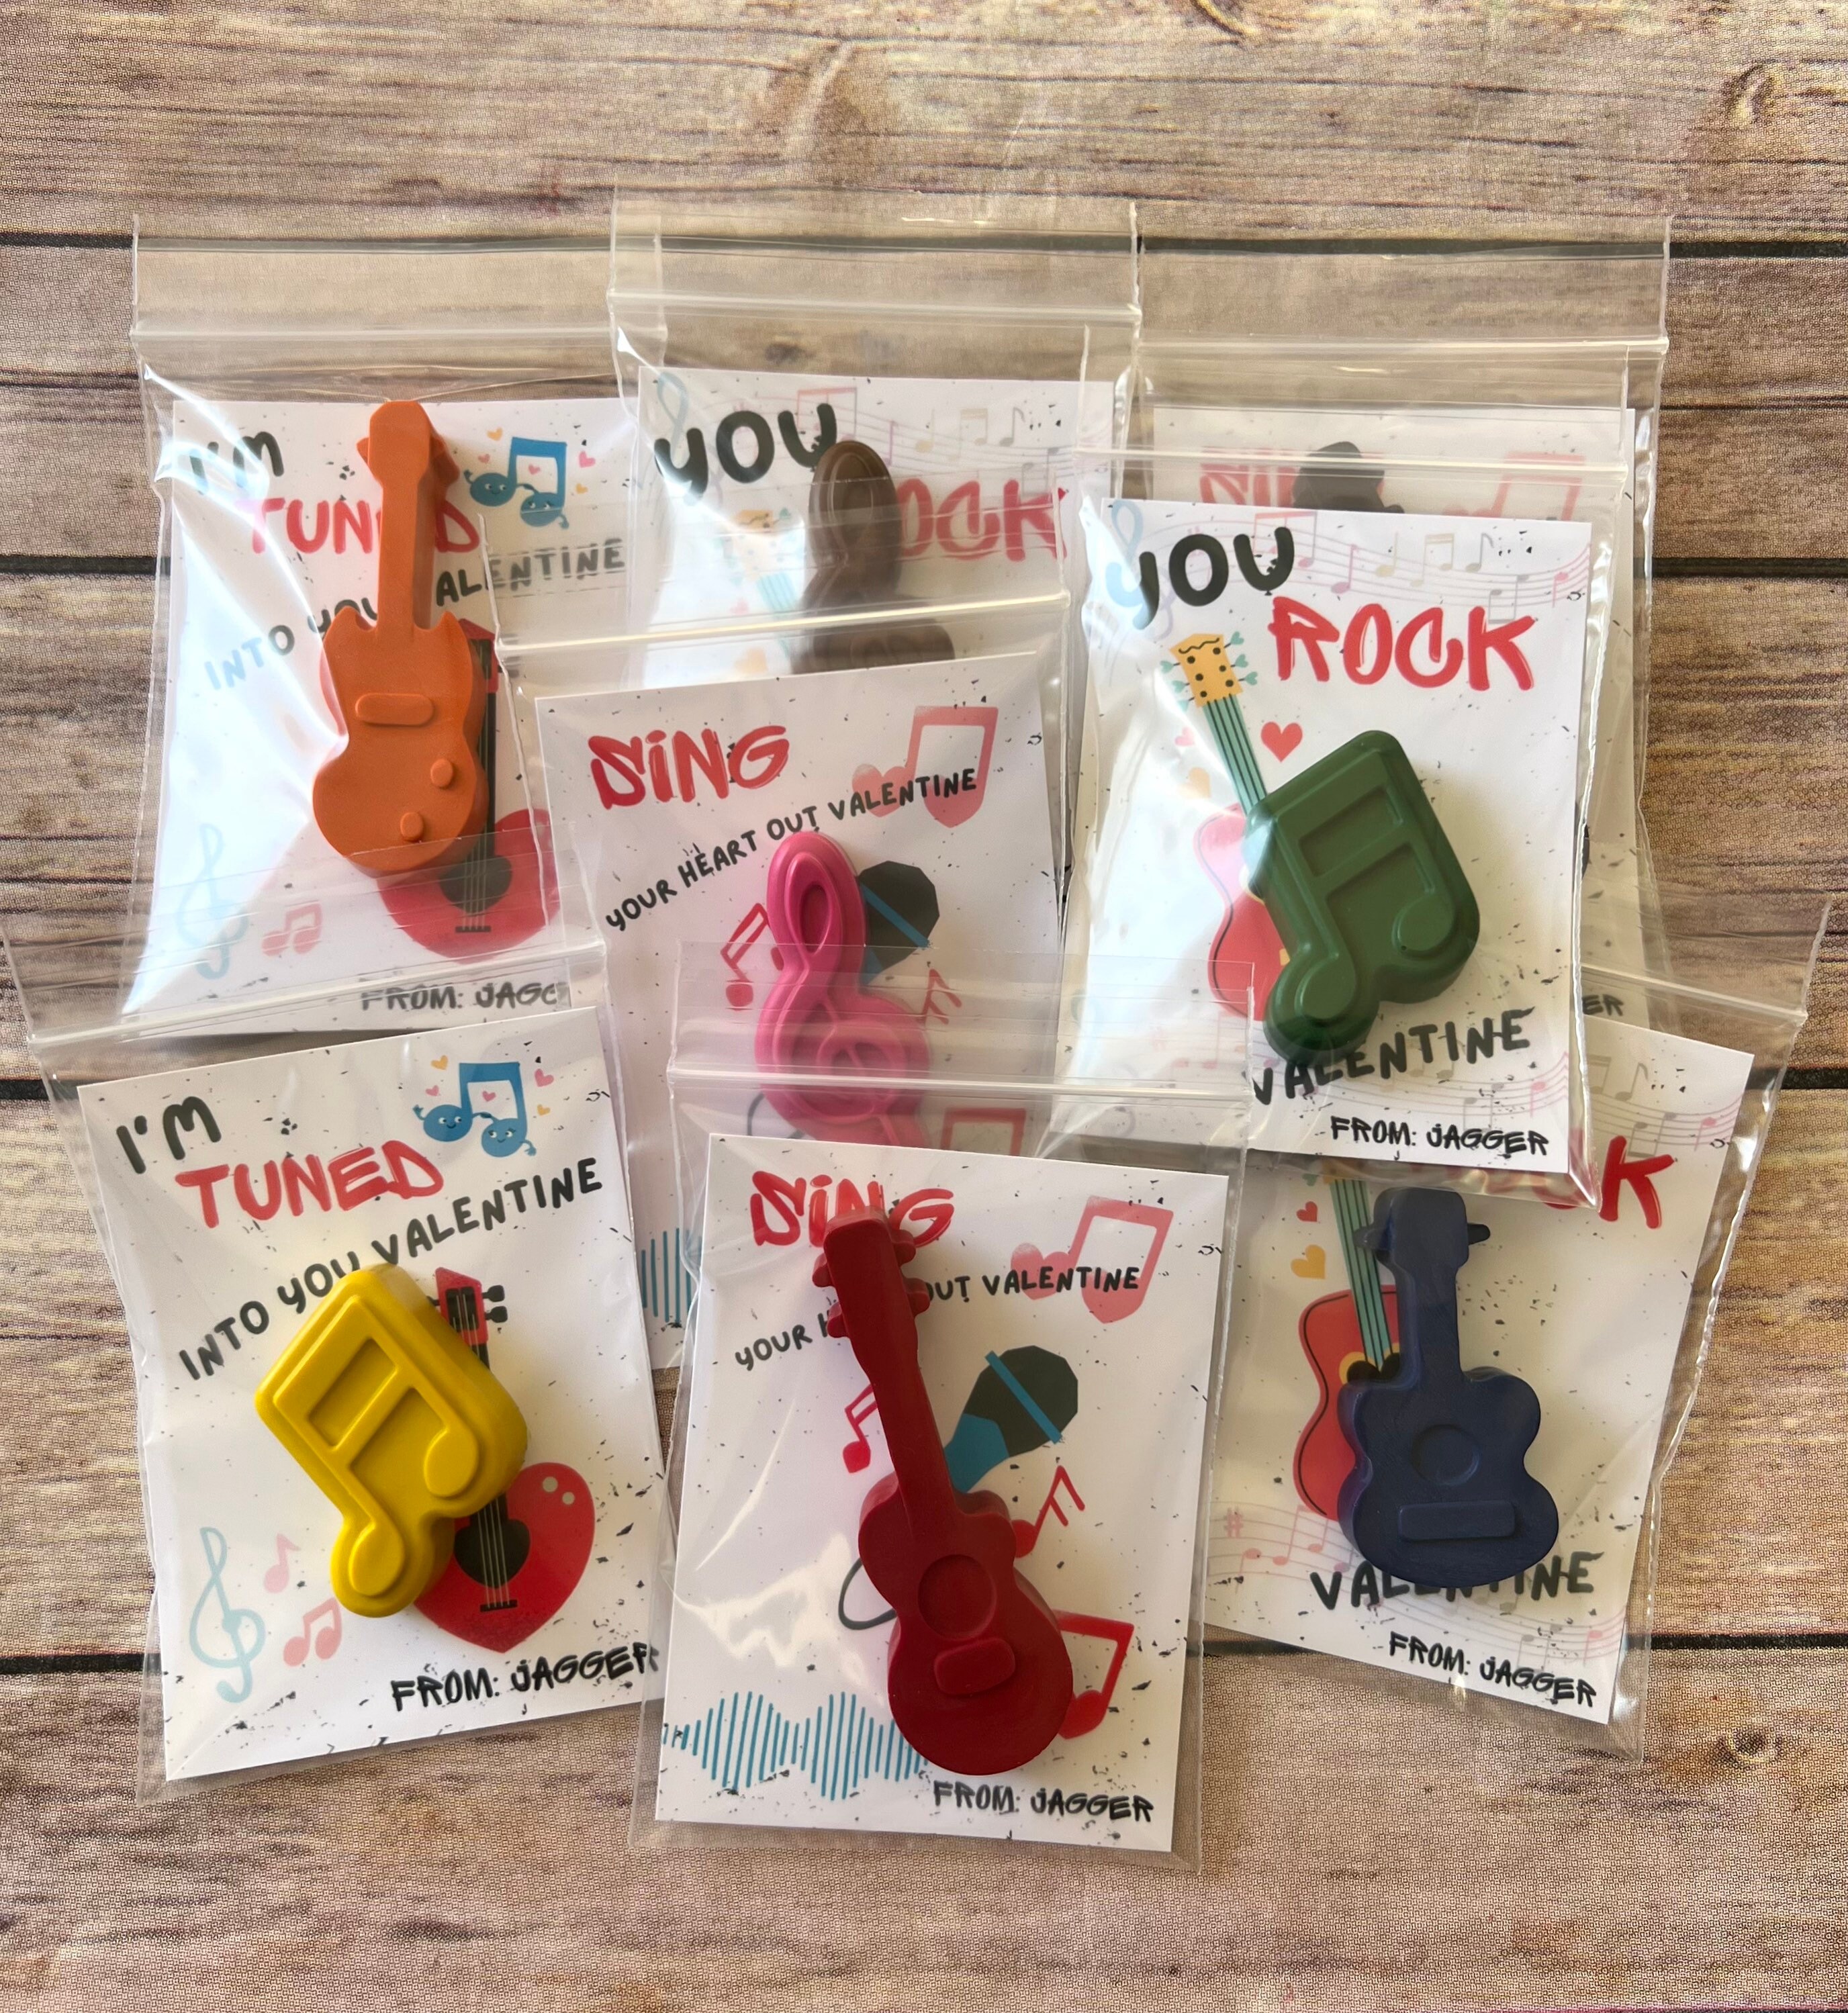 Rock Crayons Rock Crayon Collection Gifts for Kids Stocking Stuffers Kids  Birthday Gifts Basket Stuffers Birthday Gifts for Kids 